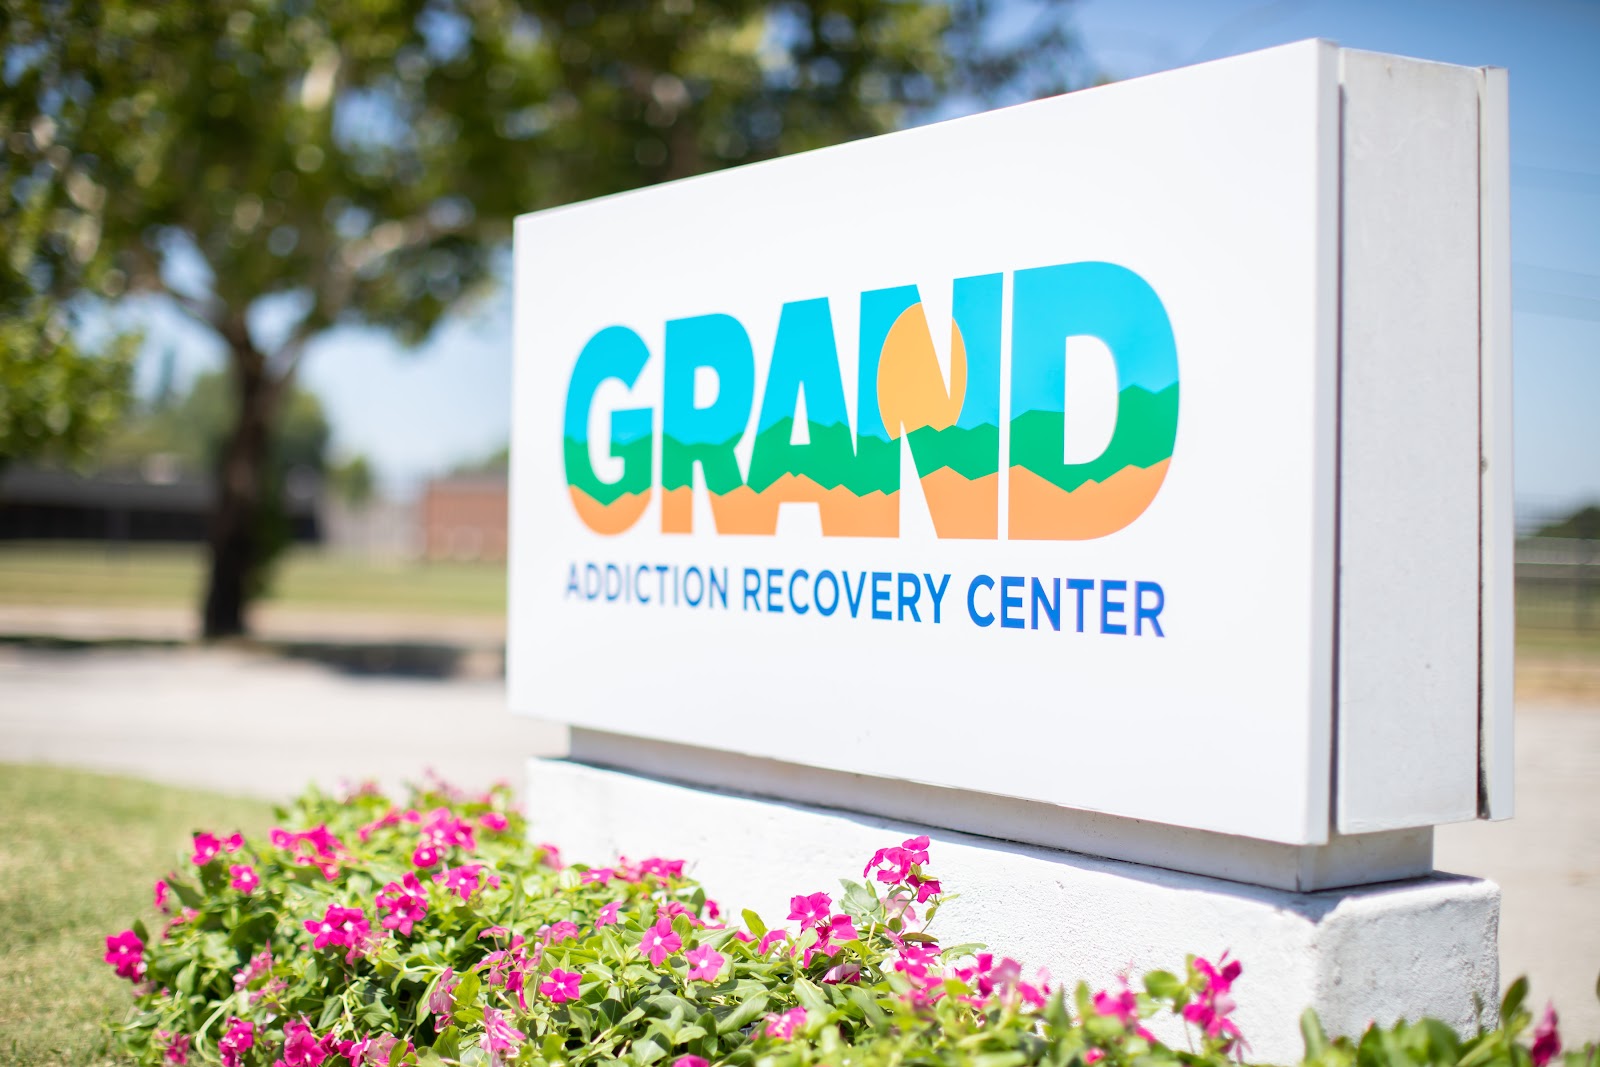 12 and 12 - GRAND Addiction Recovery Center